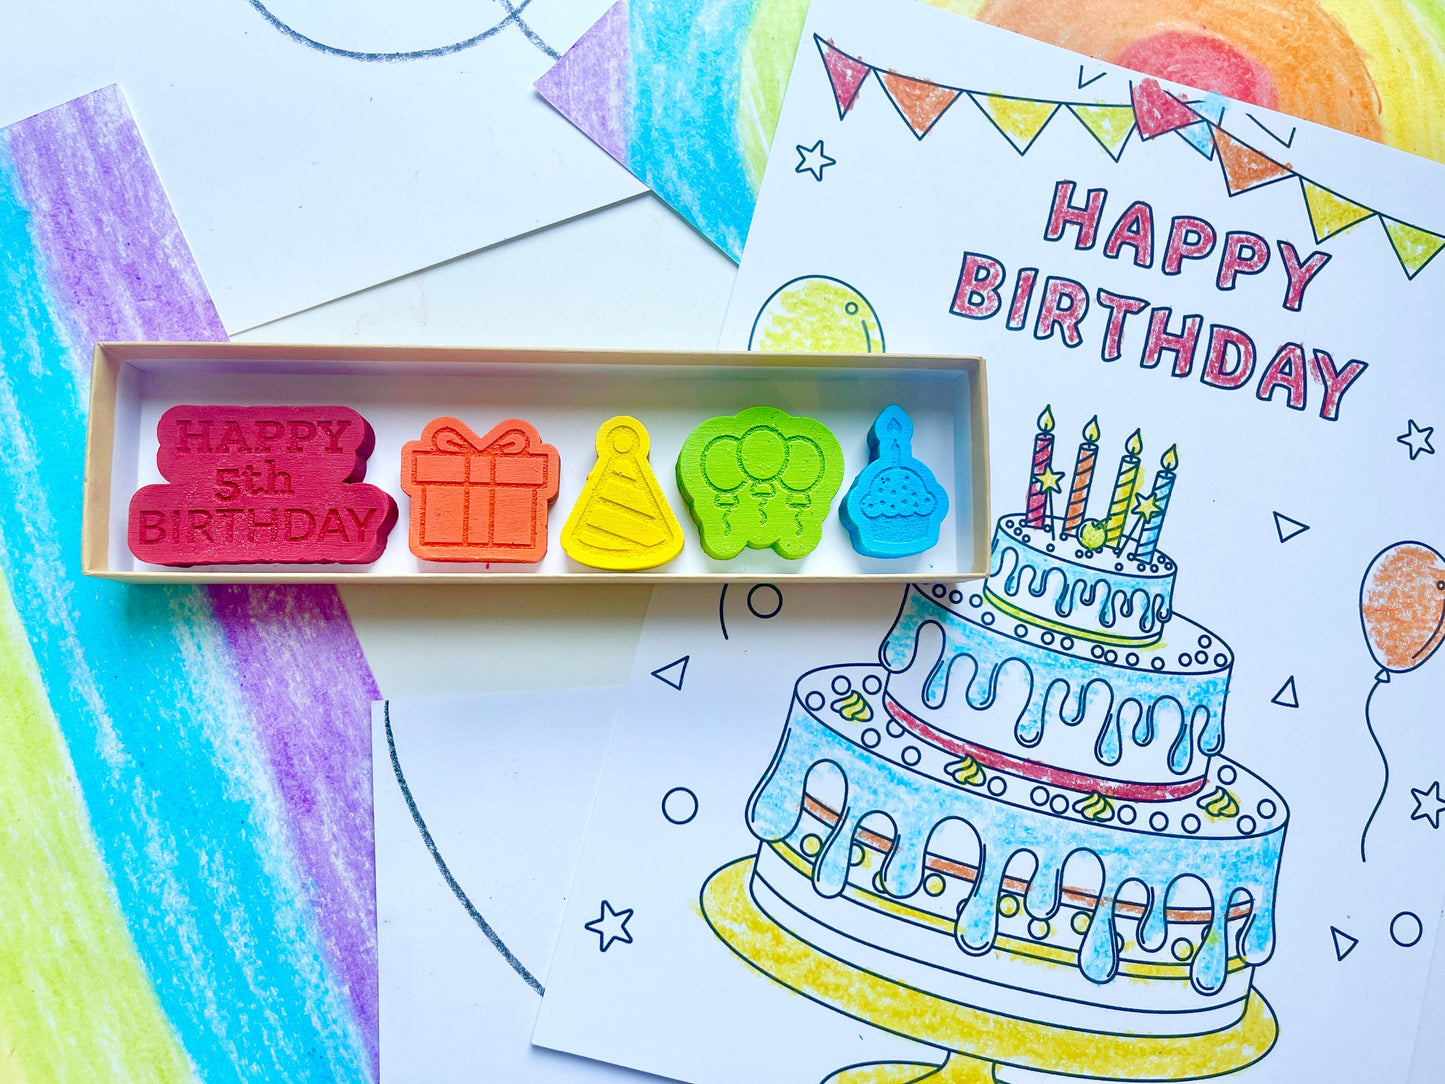 5th Birthday Crayons - 5th Birthday Gifts - Kids Happy Birthday Gifts - Kids Birthday Presents - Gifts For Kids - 5th Birthday Party Favors